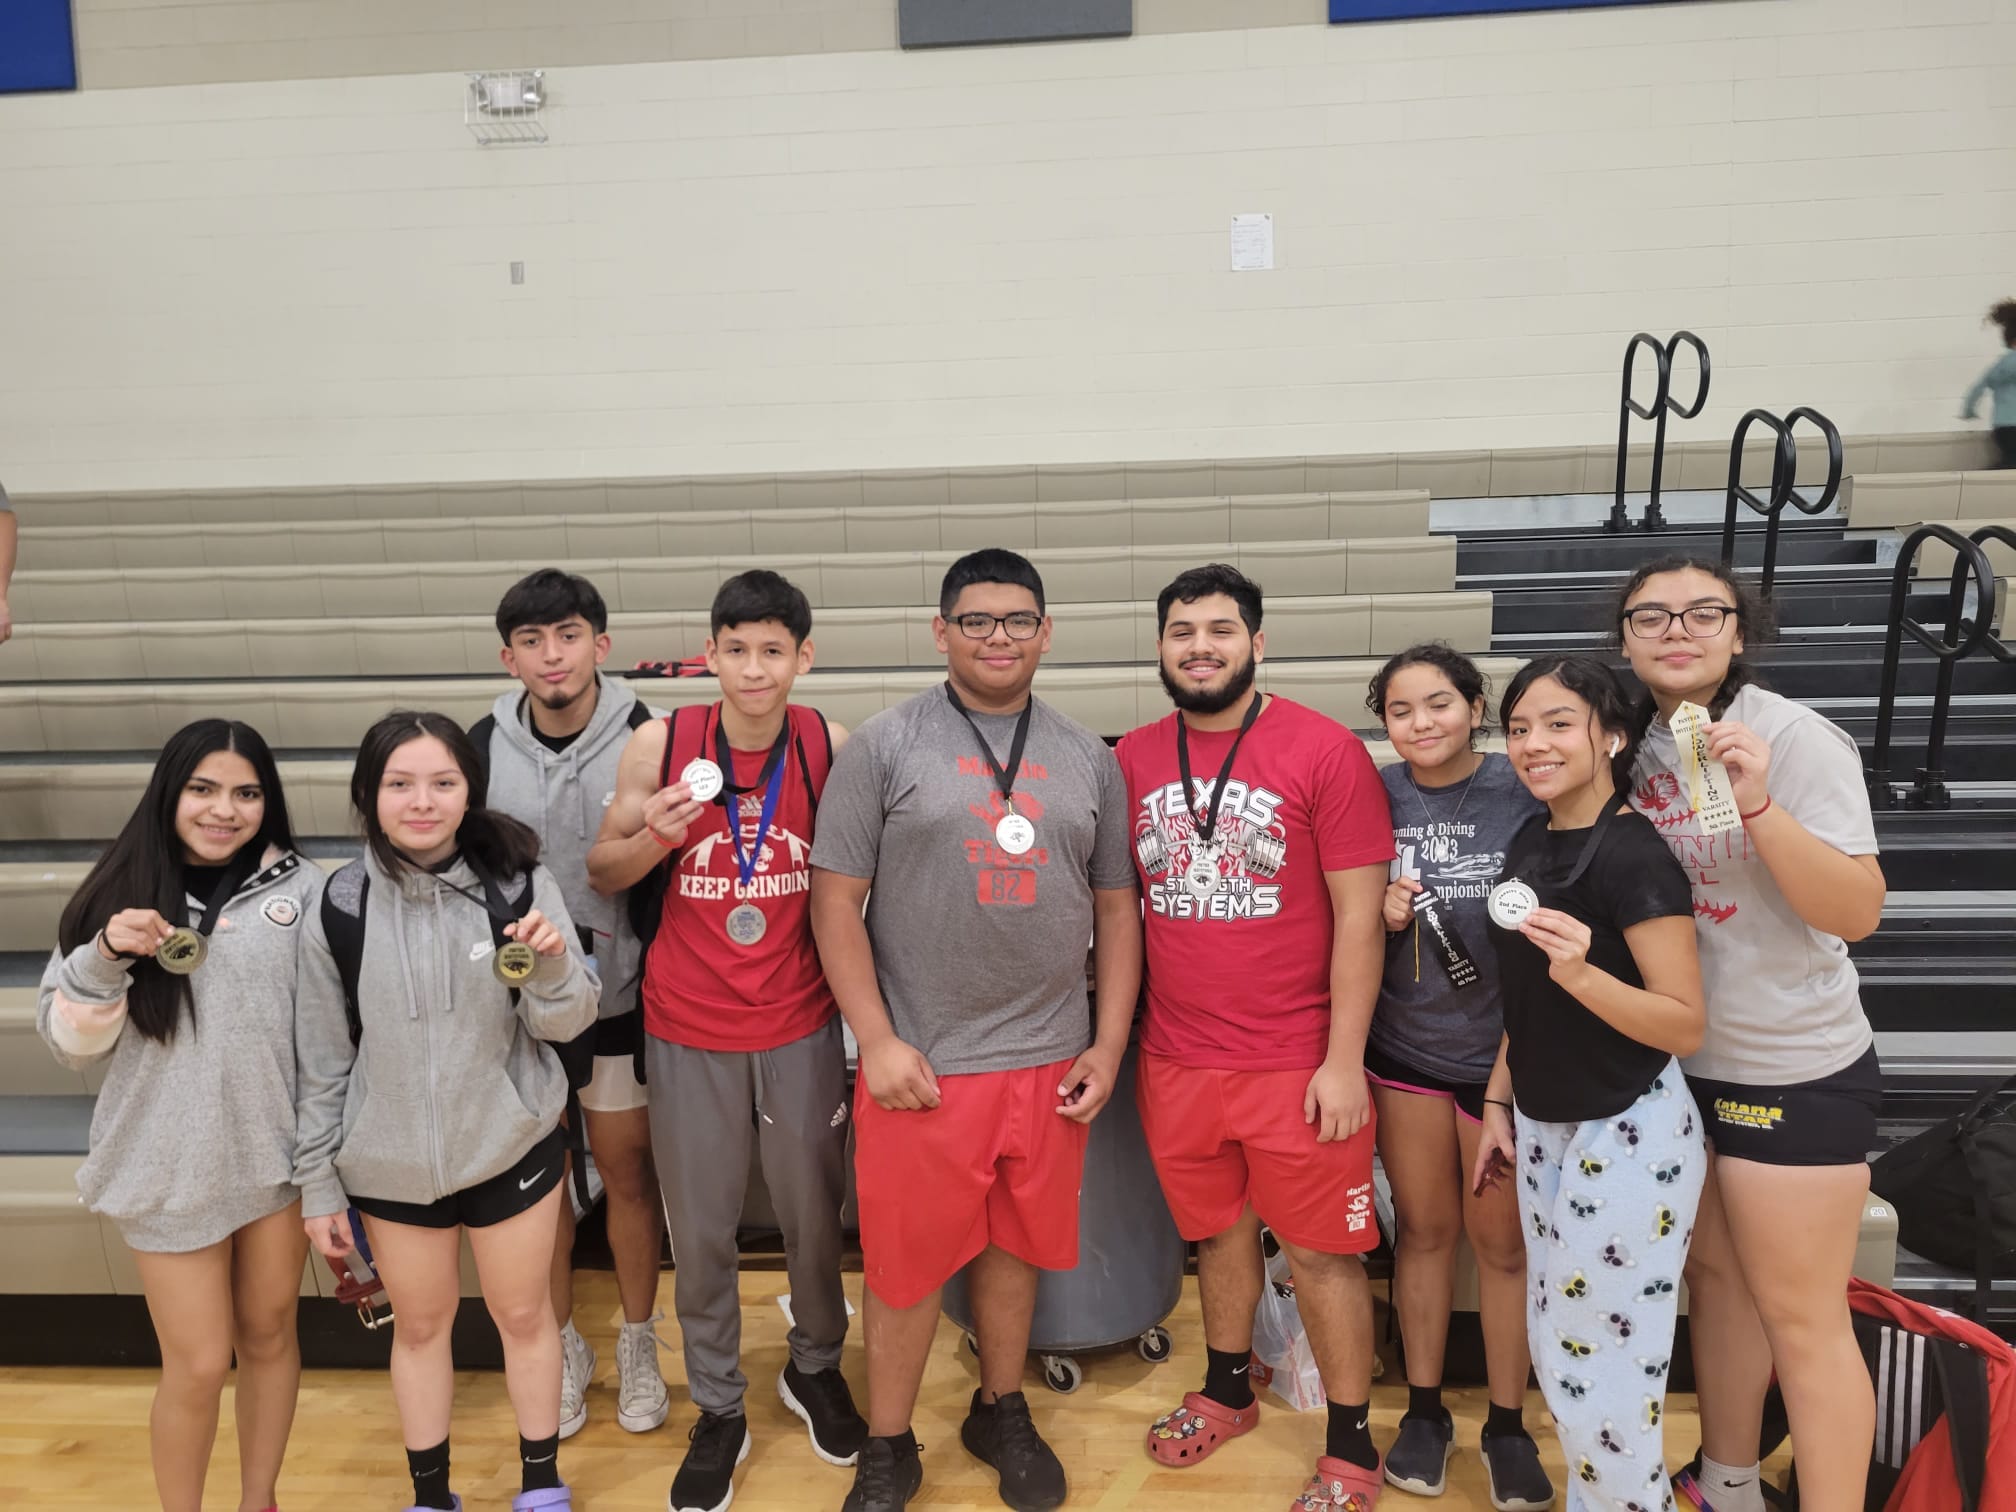 In Weightlifting, our Tigers participitated at the United South Invitational: 97.5, Zoey Gonzalez 1st place 105.5,  Clarissa Marquez 1st place & Dominique Reyes 2nd 123.5,  Riana Aguilar  4th 181.5,  Jennifer mosqueda 5th 123,  Jorge Sistoff 2nd 148, Jerry Vargas 5th 242 Peter Contreras 2nd 275,  Mark Garcia 2nd